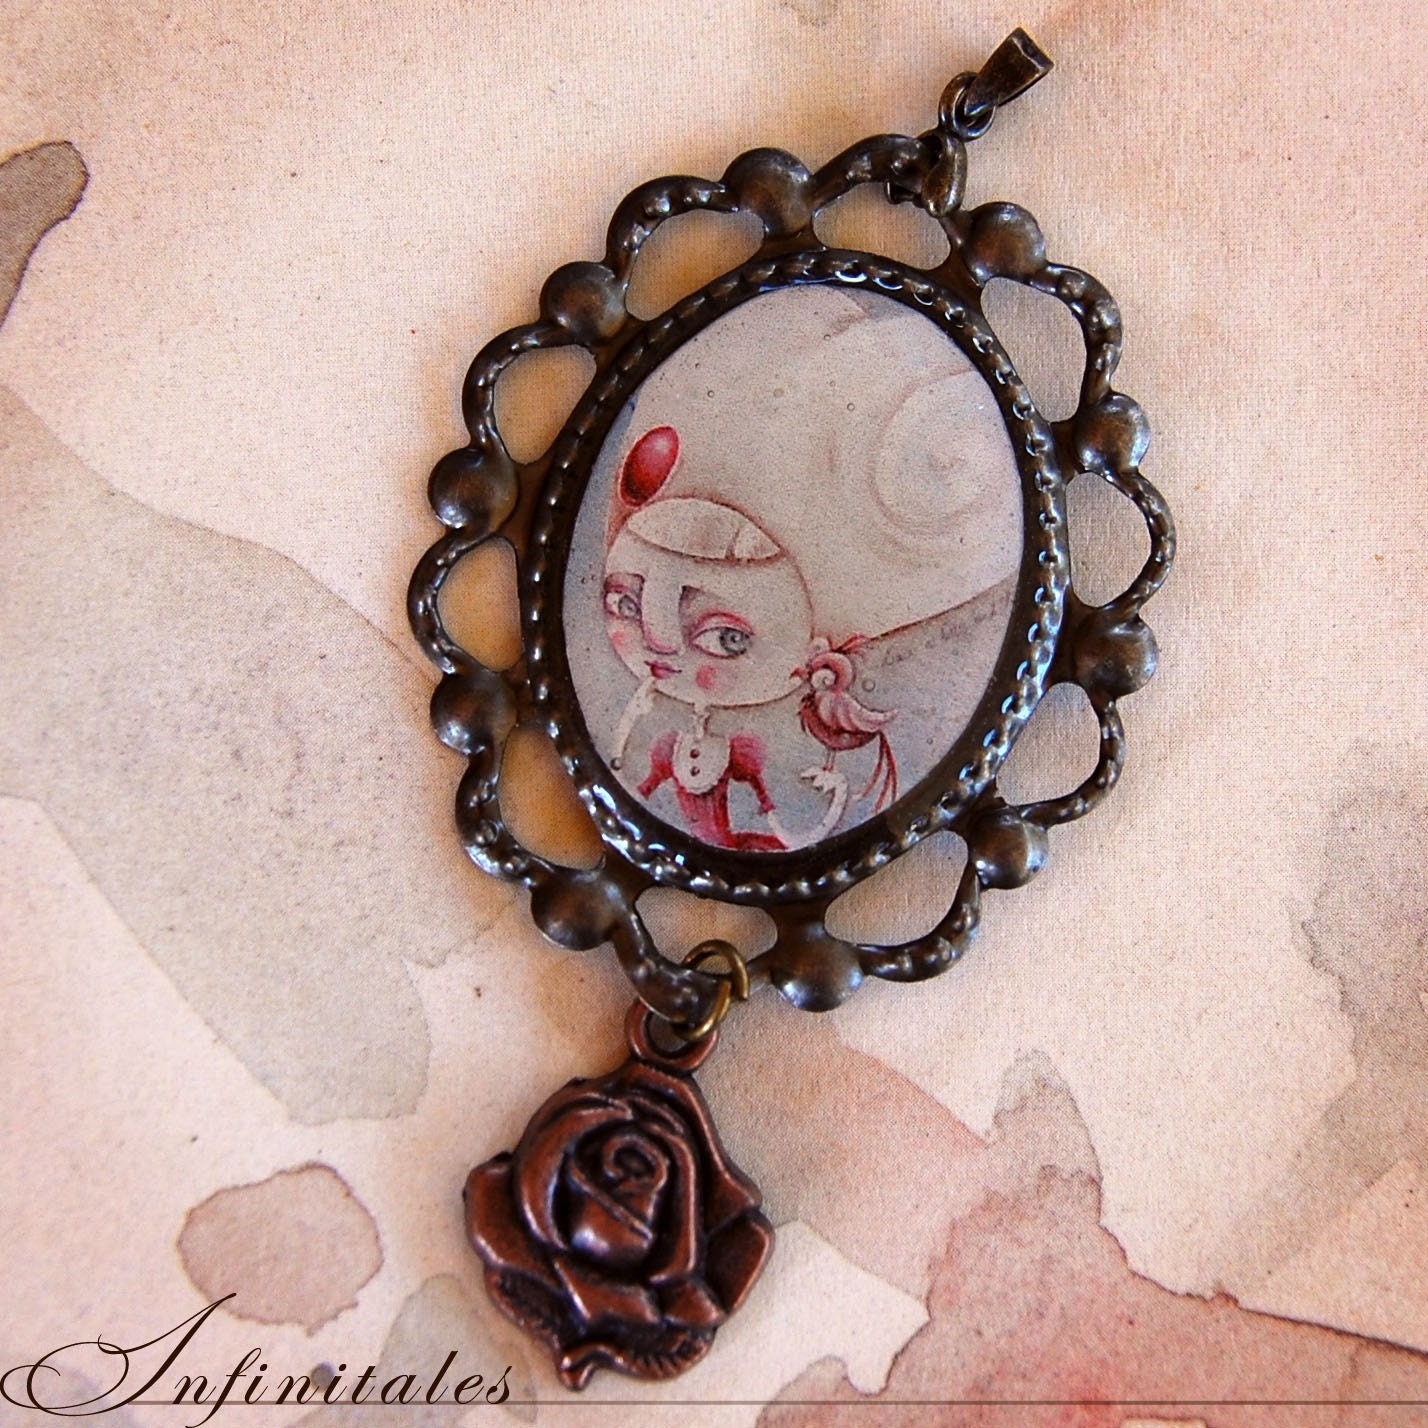 Cameo pendant  with charm - Once a little bird told me